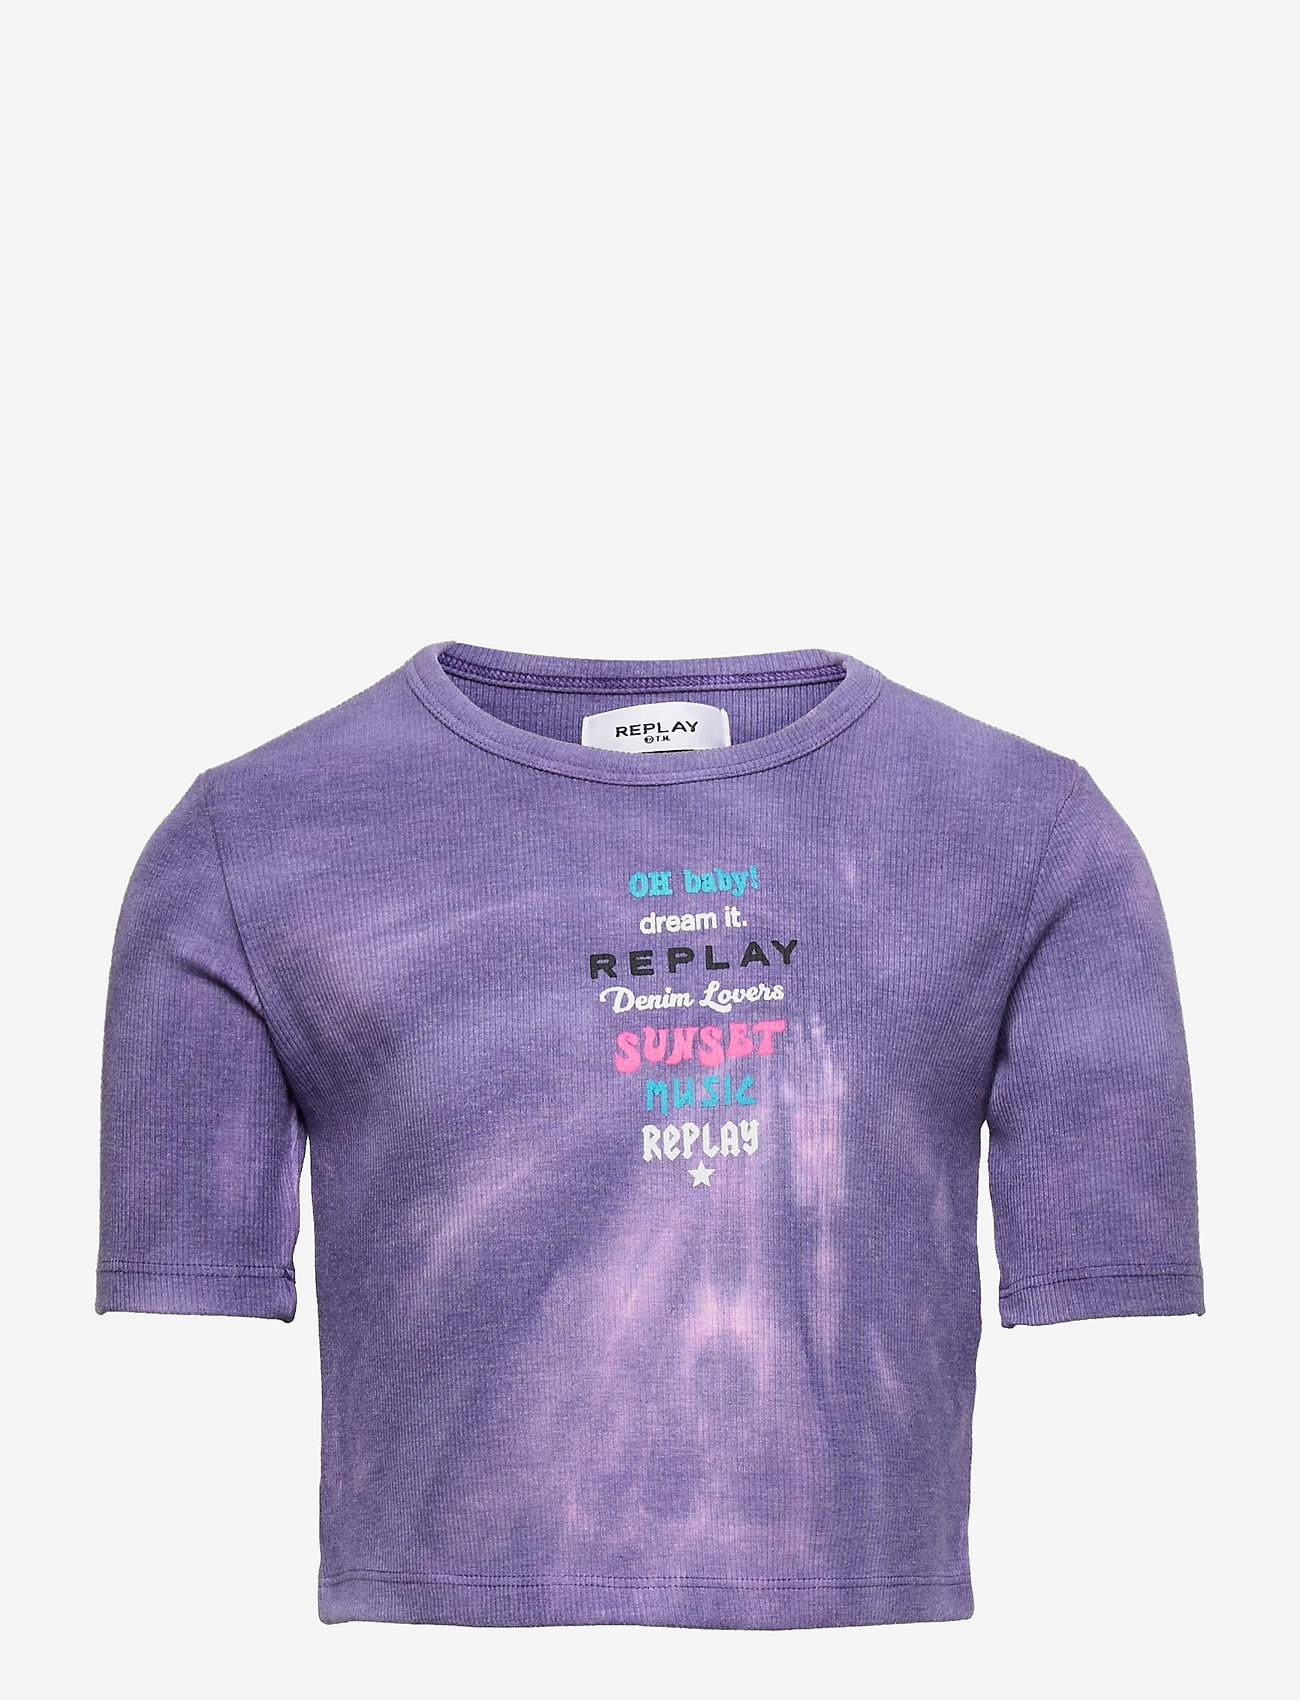 Replay - T-Shirt - short-sleeved t-shirts - tie & dye pink - violet - 0